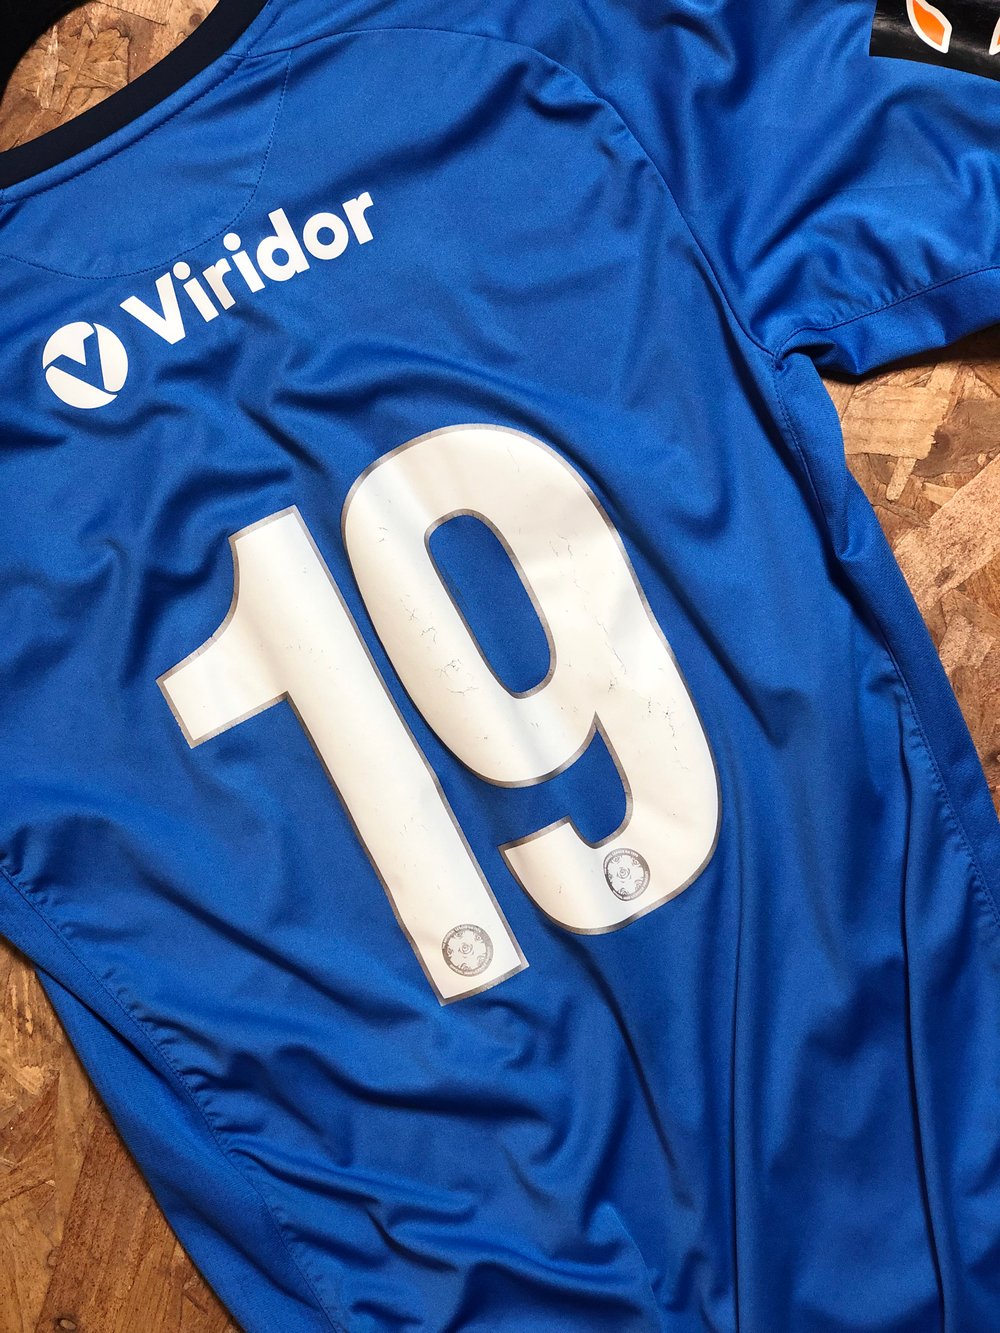 Player Issue 2018/19 Joma Home Shirt 19